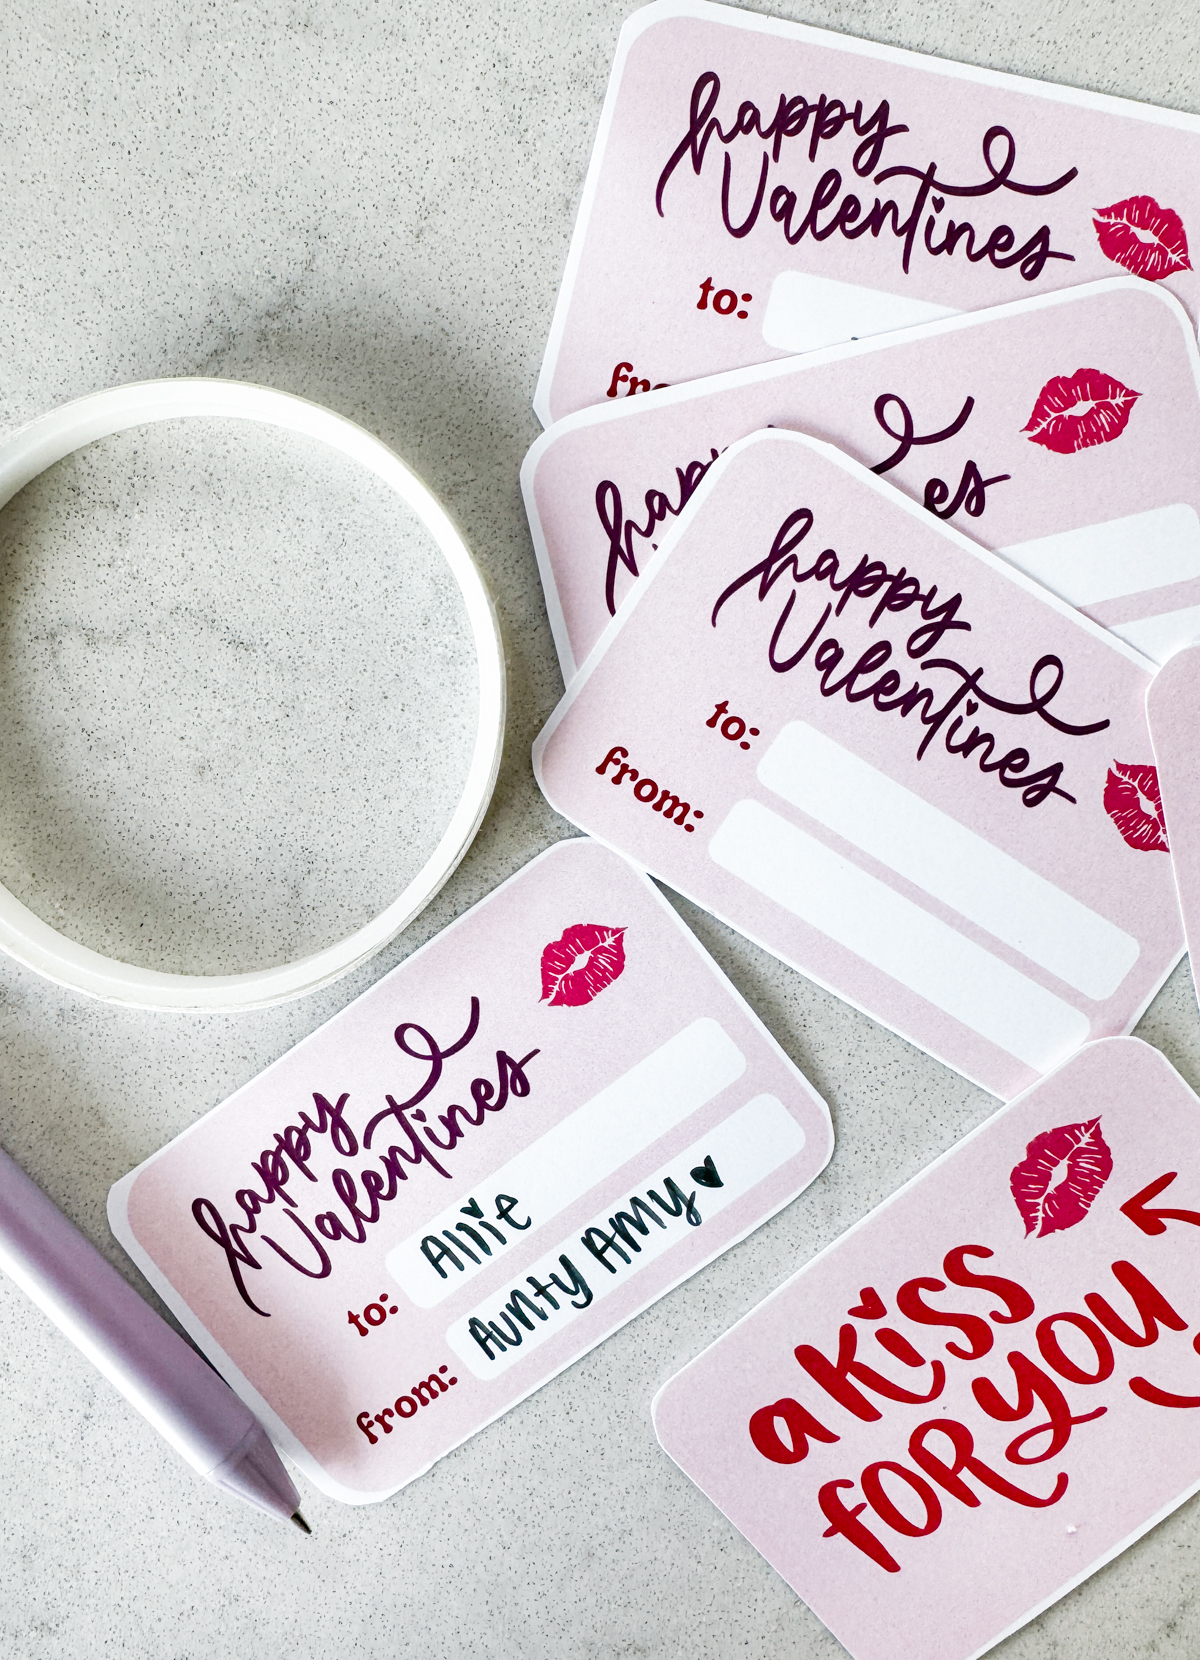 image of pink valentines cards cut to size with rounded corners. purple hand lettering reads 'happy valentines' with a kiss and space for the to and from names, front of valentine shown reads 'a kiss for you'